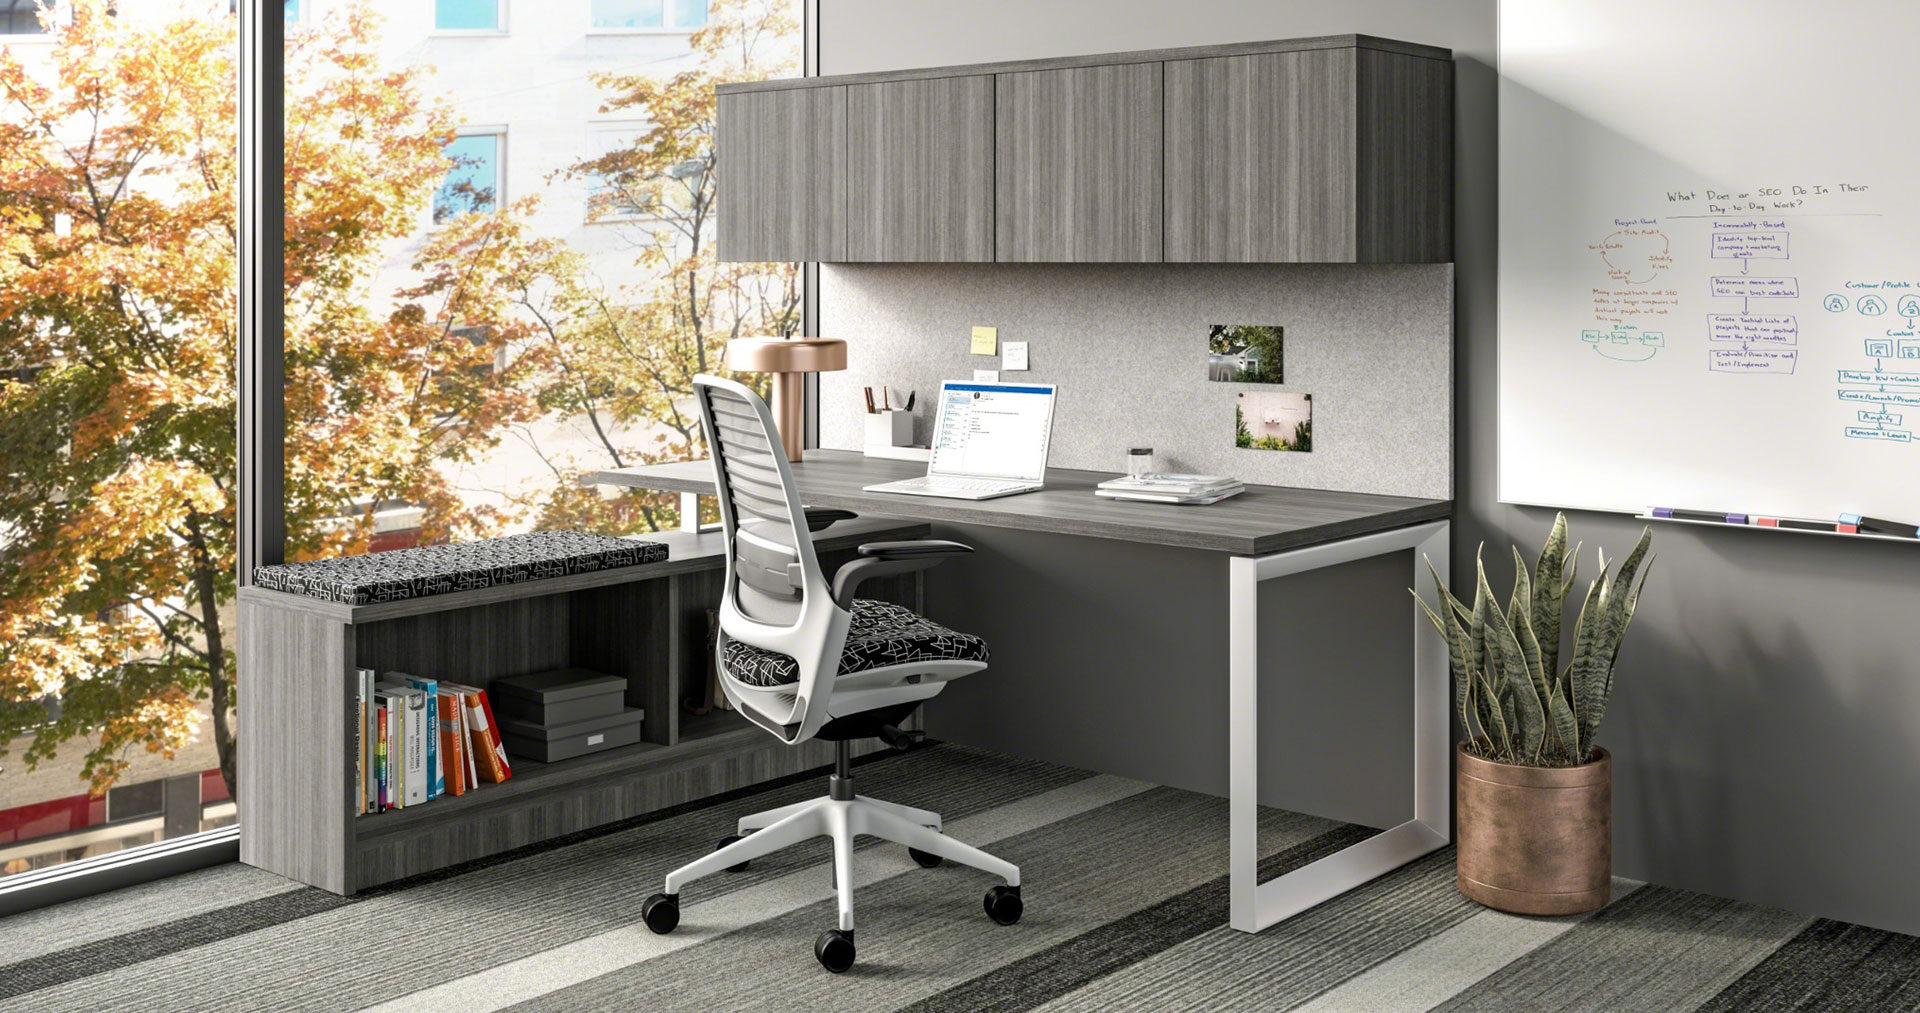 NBS-Furniture_Private-Office-2_1920x